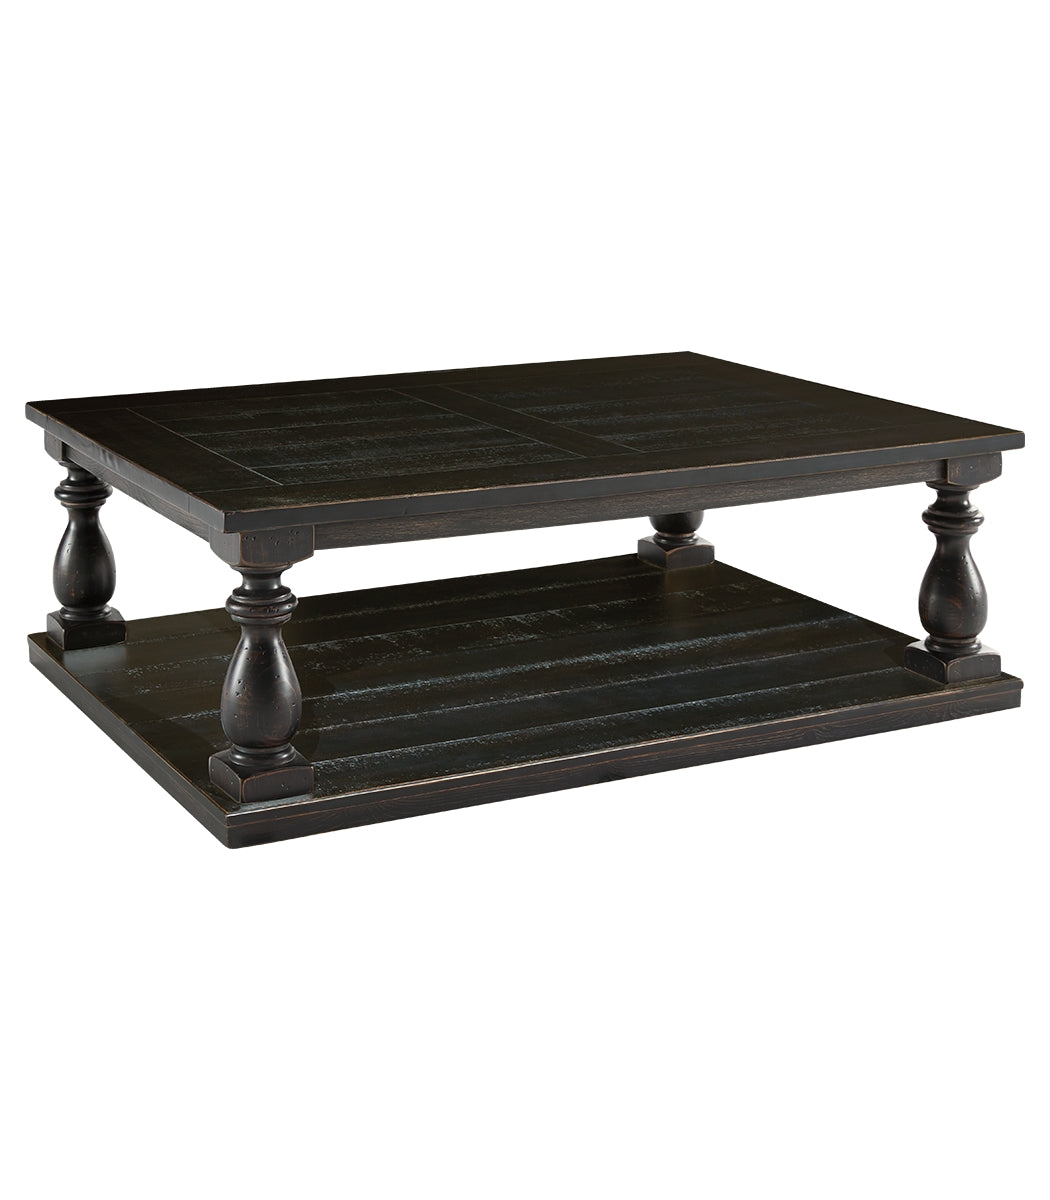 Mallacar Coffee Table with 1 End Table